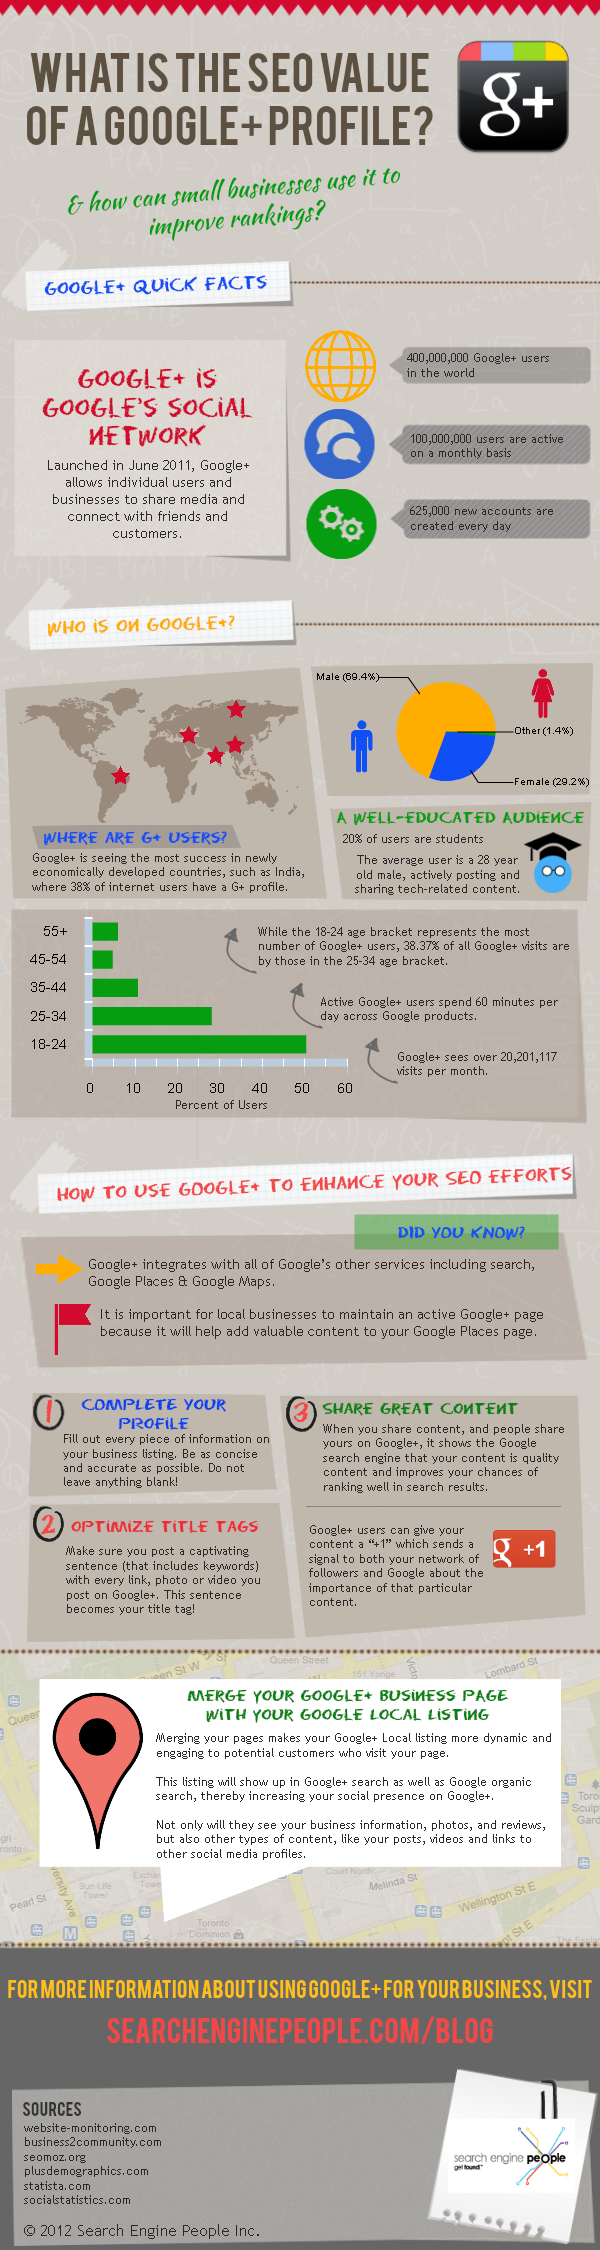 What Is the SEO Value of a Google+ Profile